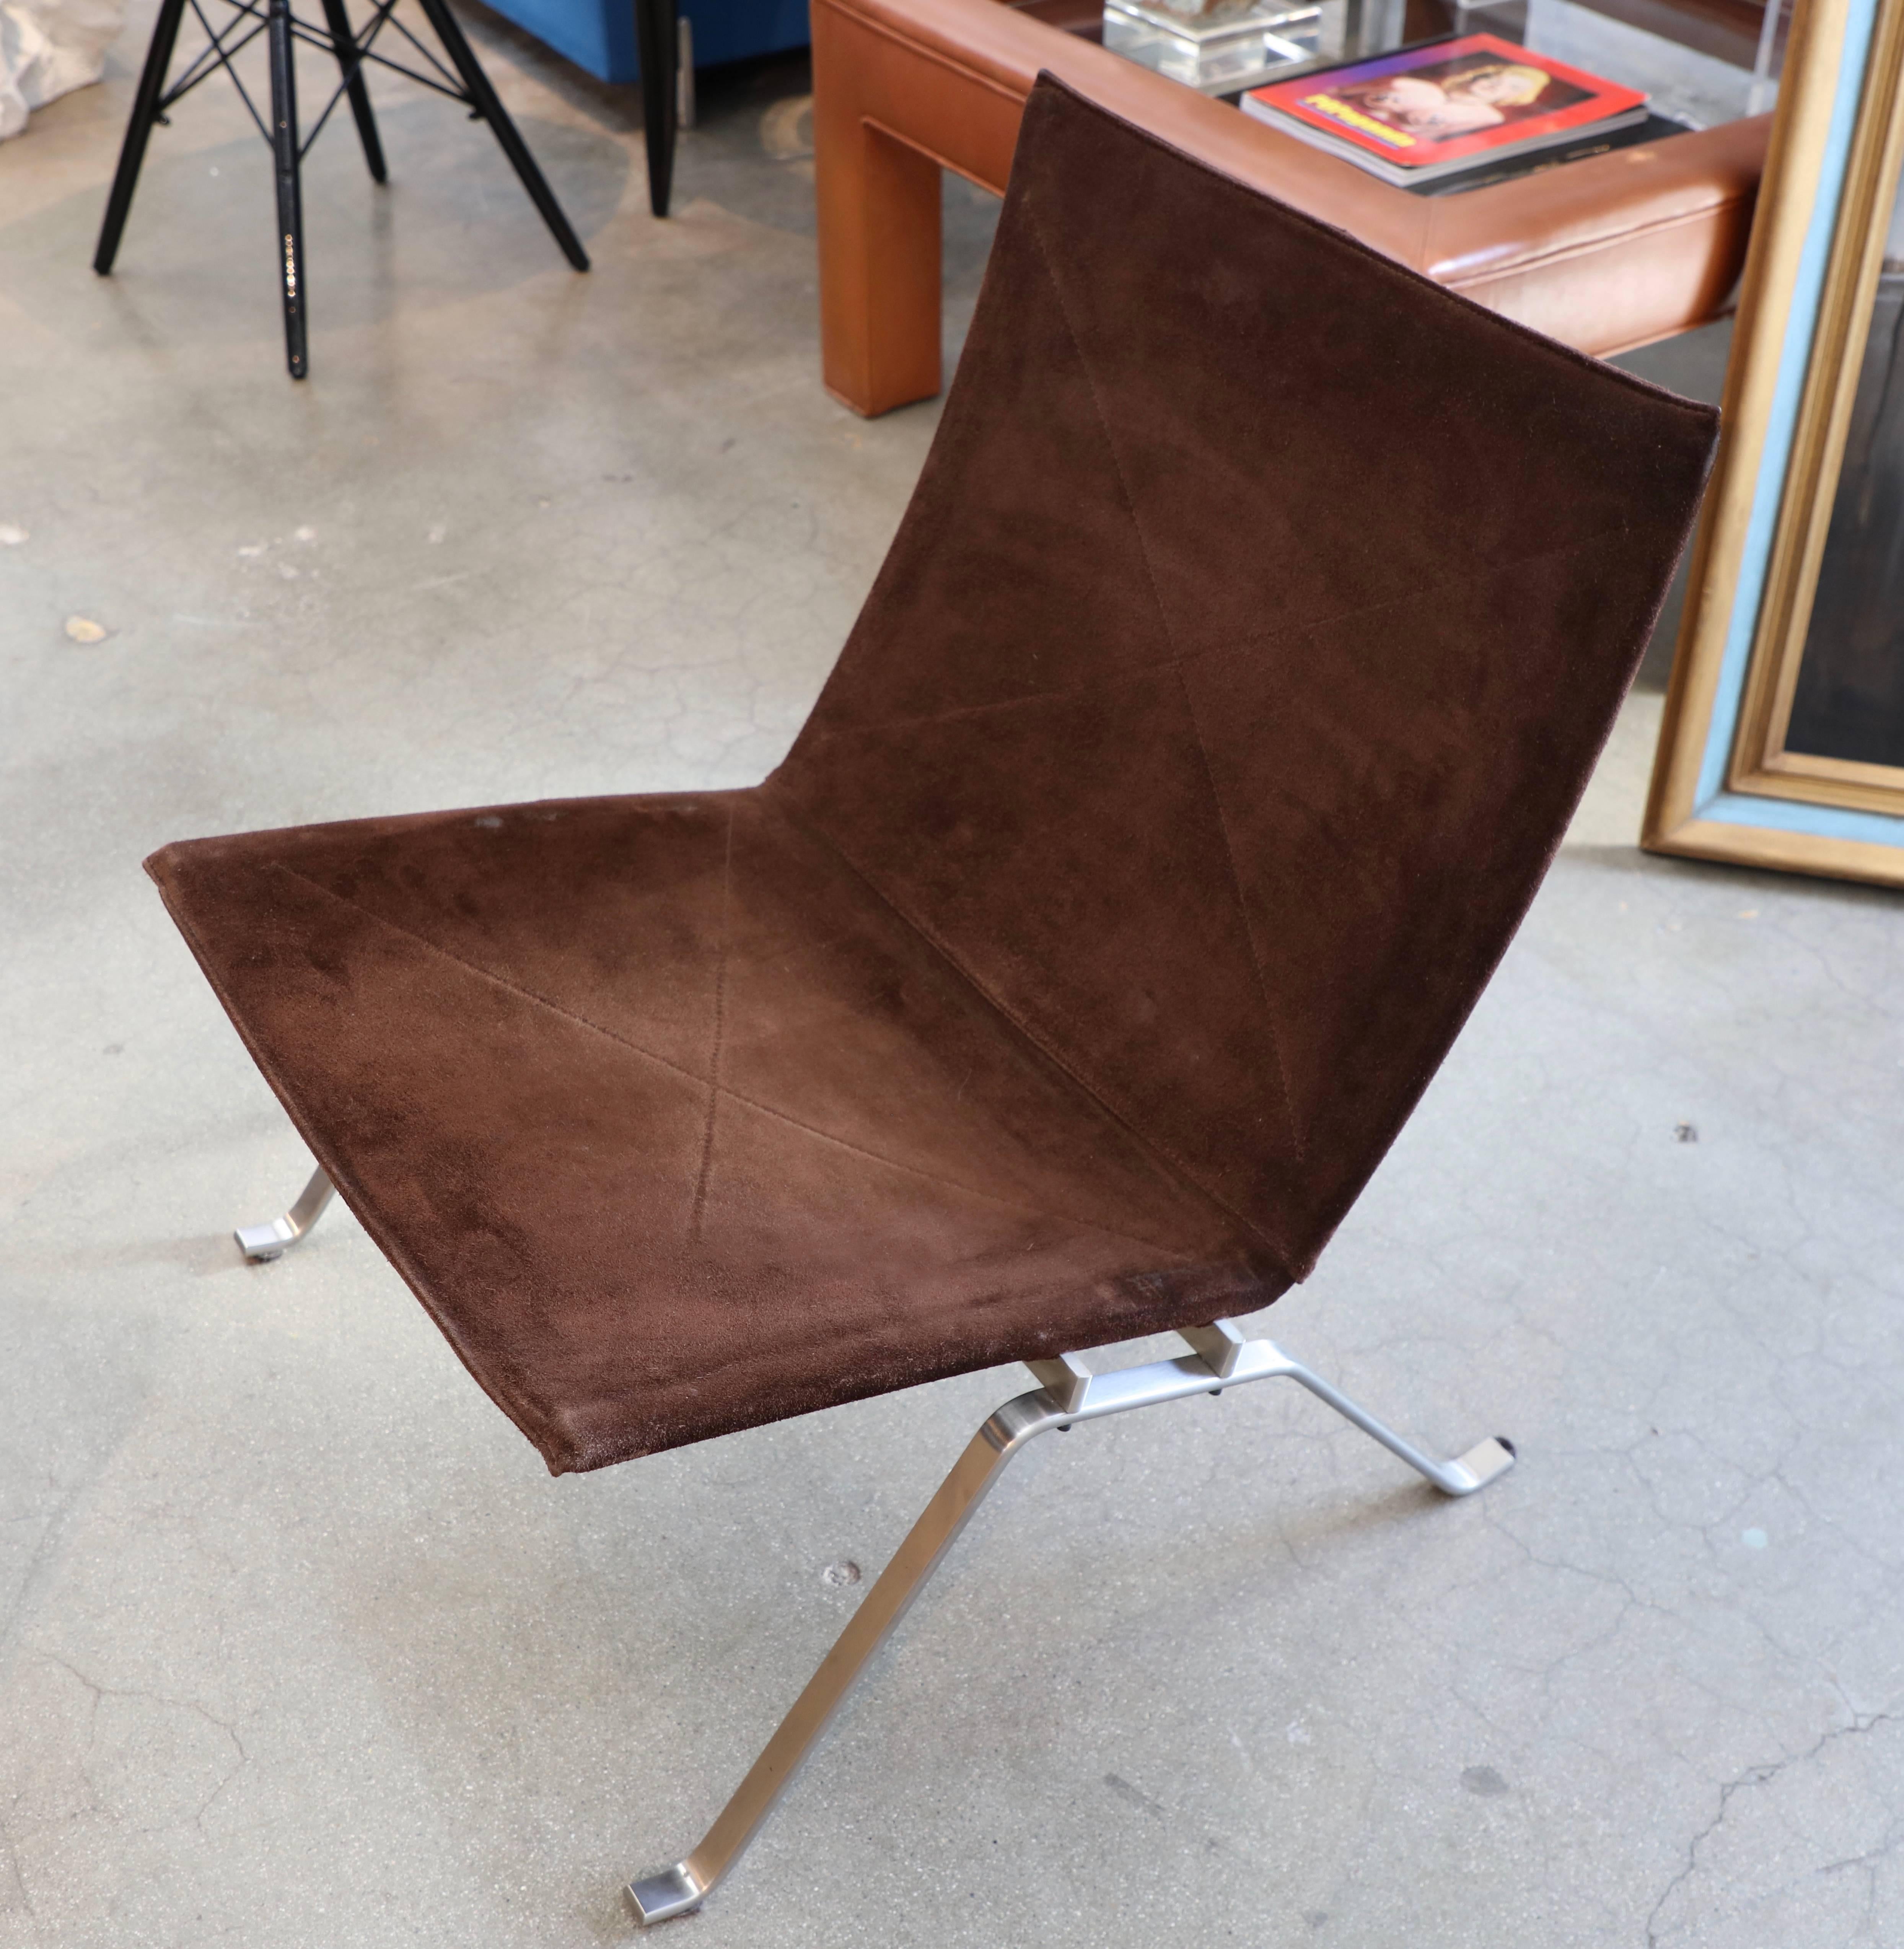 A nice older Fritz Hansen PK-22 chair originally deigned by Poul Kjaerholm in brown suede. A nice classic design It is marked n the base and fabric. Please note there are worn spots to the suede, which are pictured. An iconic design.